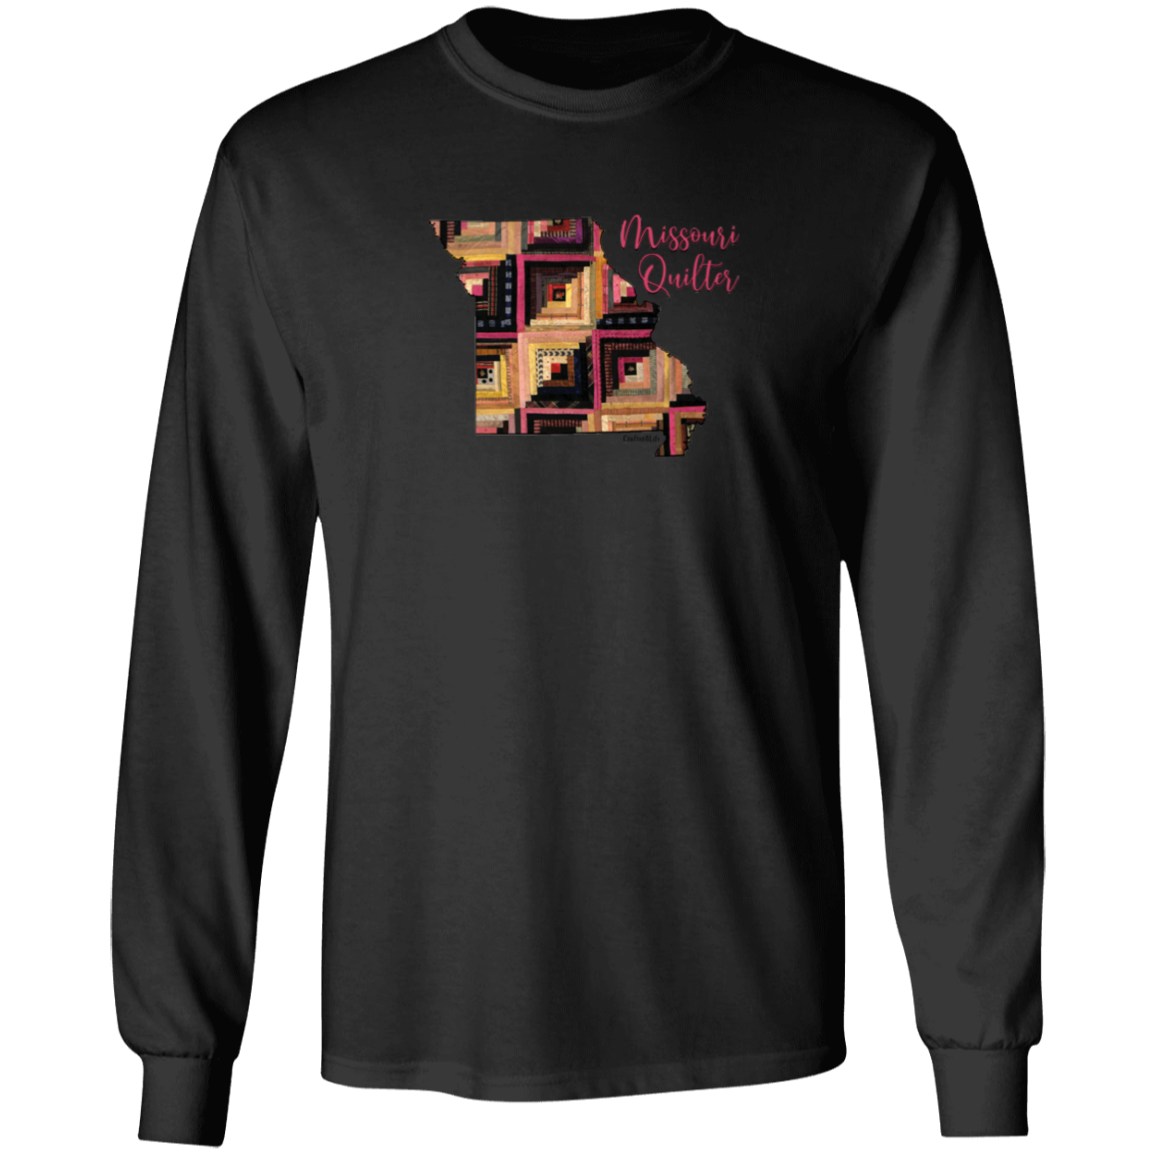 Missouri Quilter Long Sleeve T-Shirt, Gift for Quilting Friends and Family